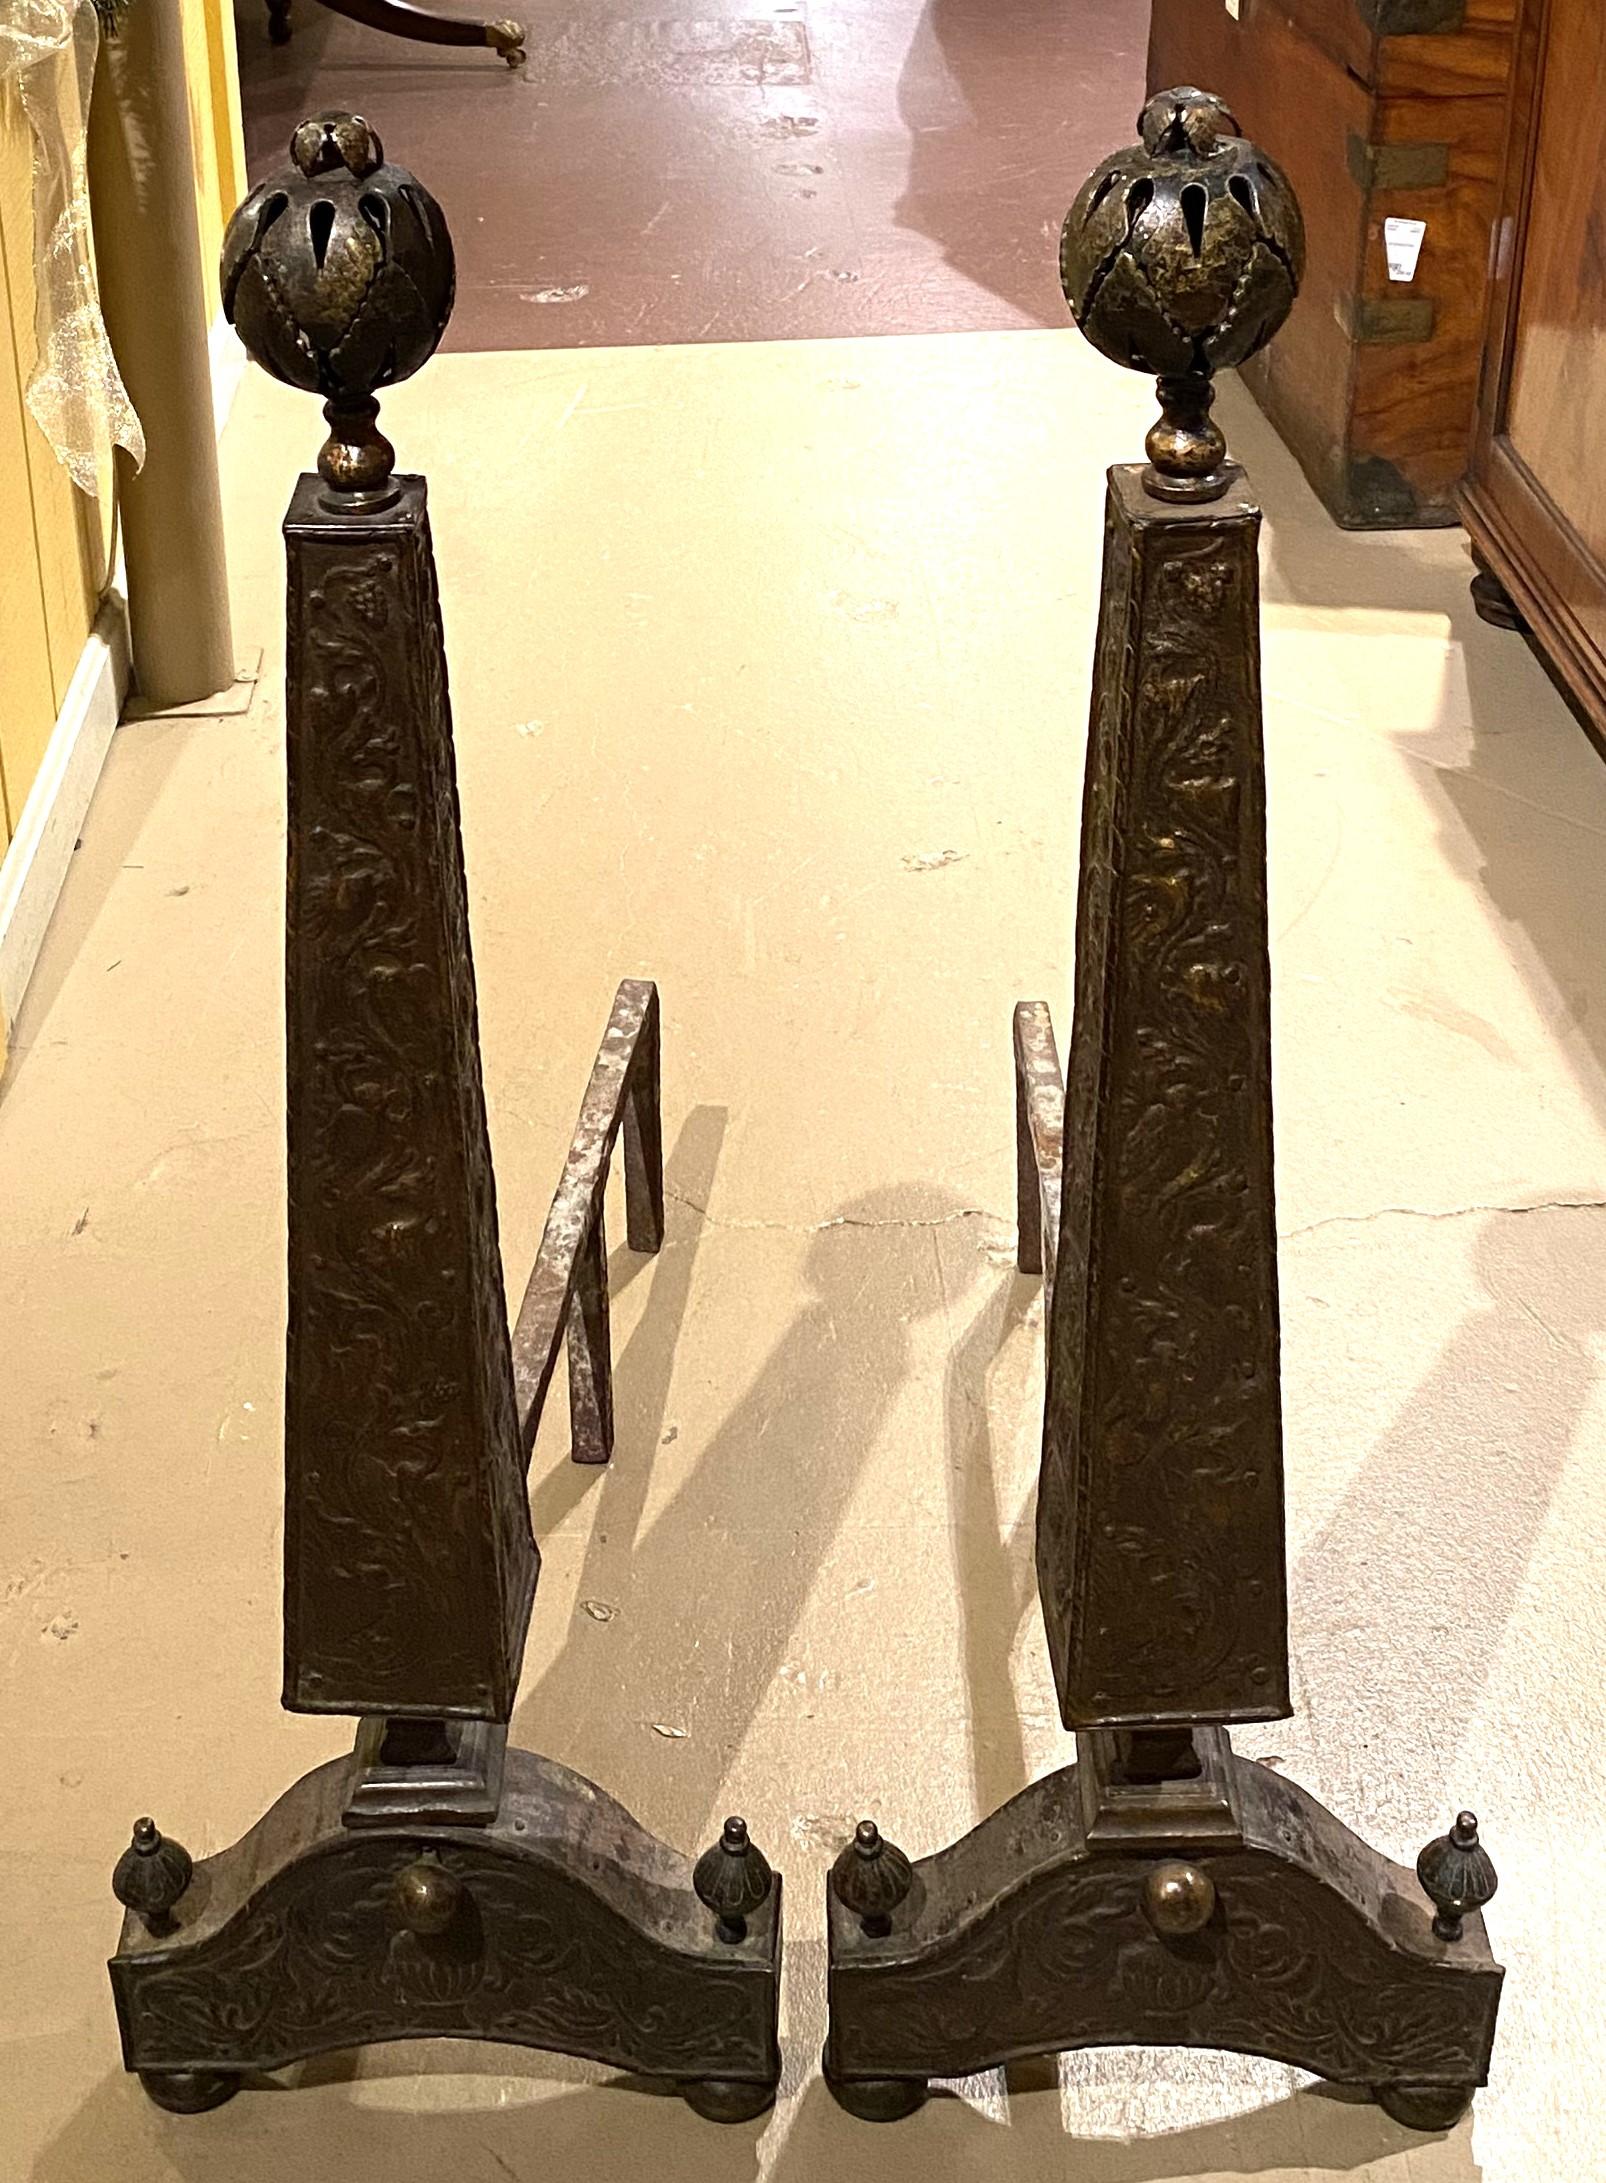 A nice pair of bronze obelisk form Arts & Crafts andirons with foliate relief decoration, reticulated ball finials, and great overall patina. The pair date to the early 20th century and are in very good condition, with some light rust on the dogs,